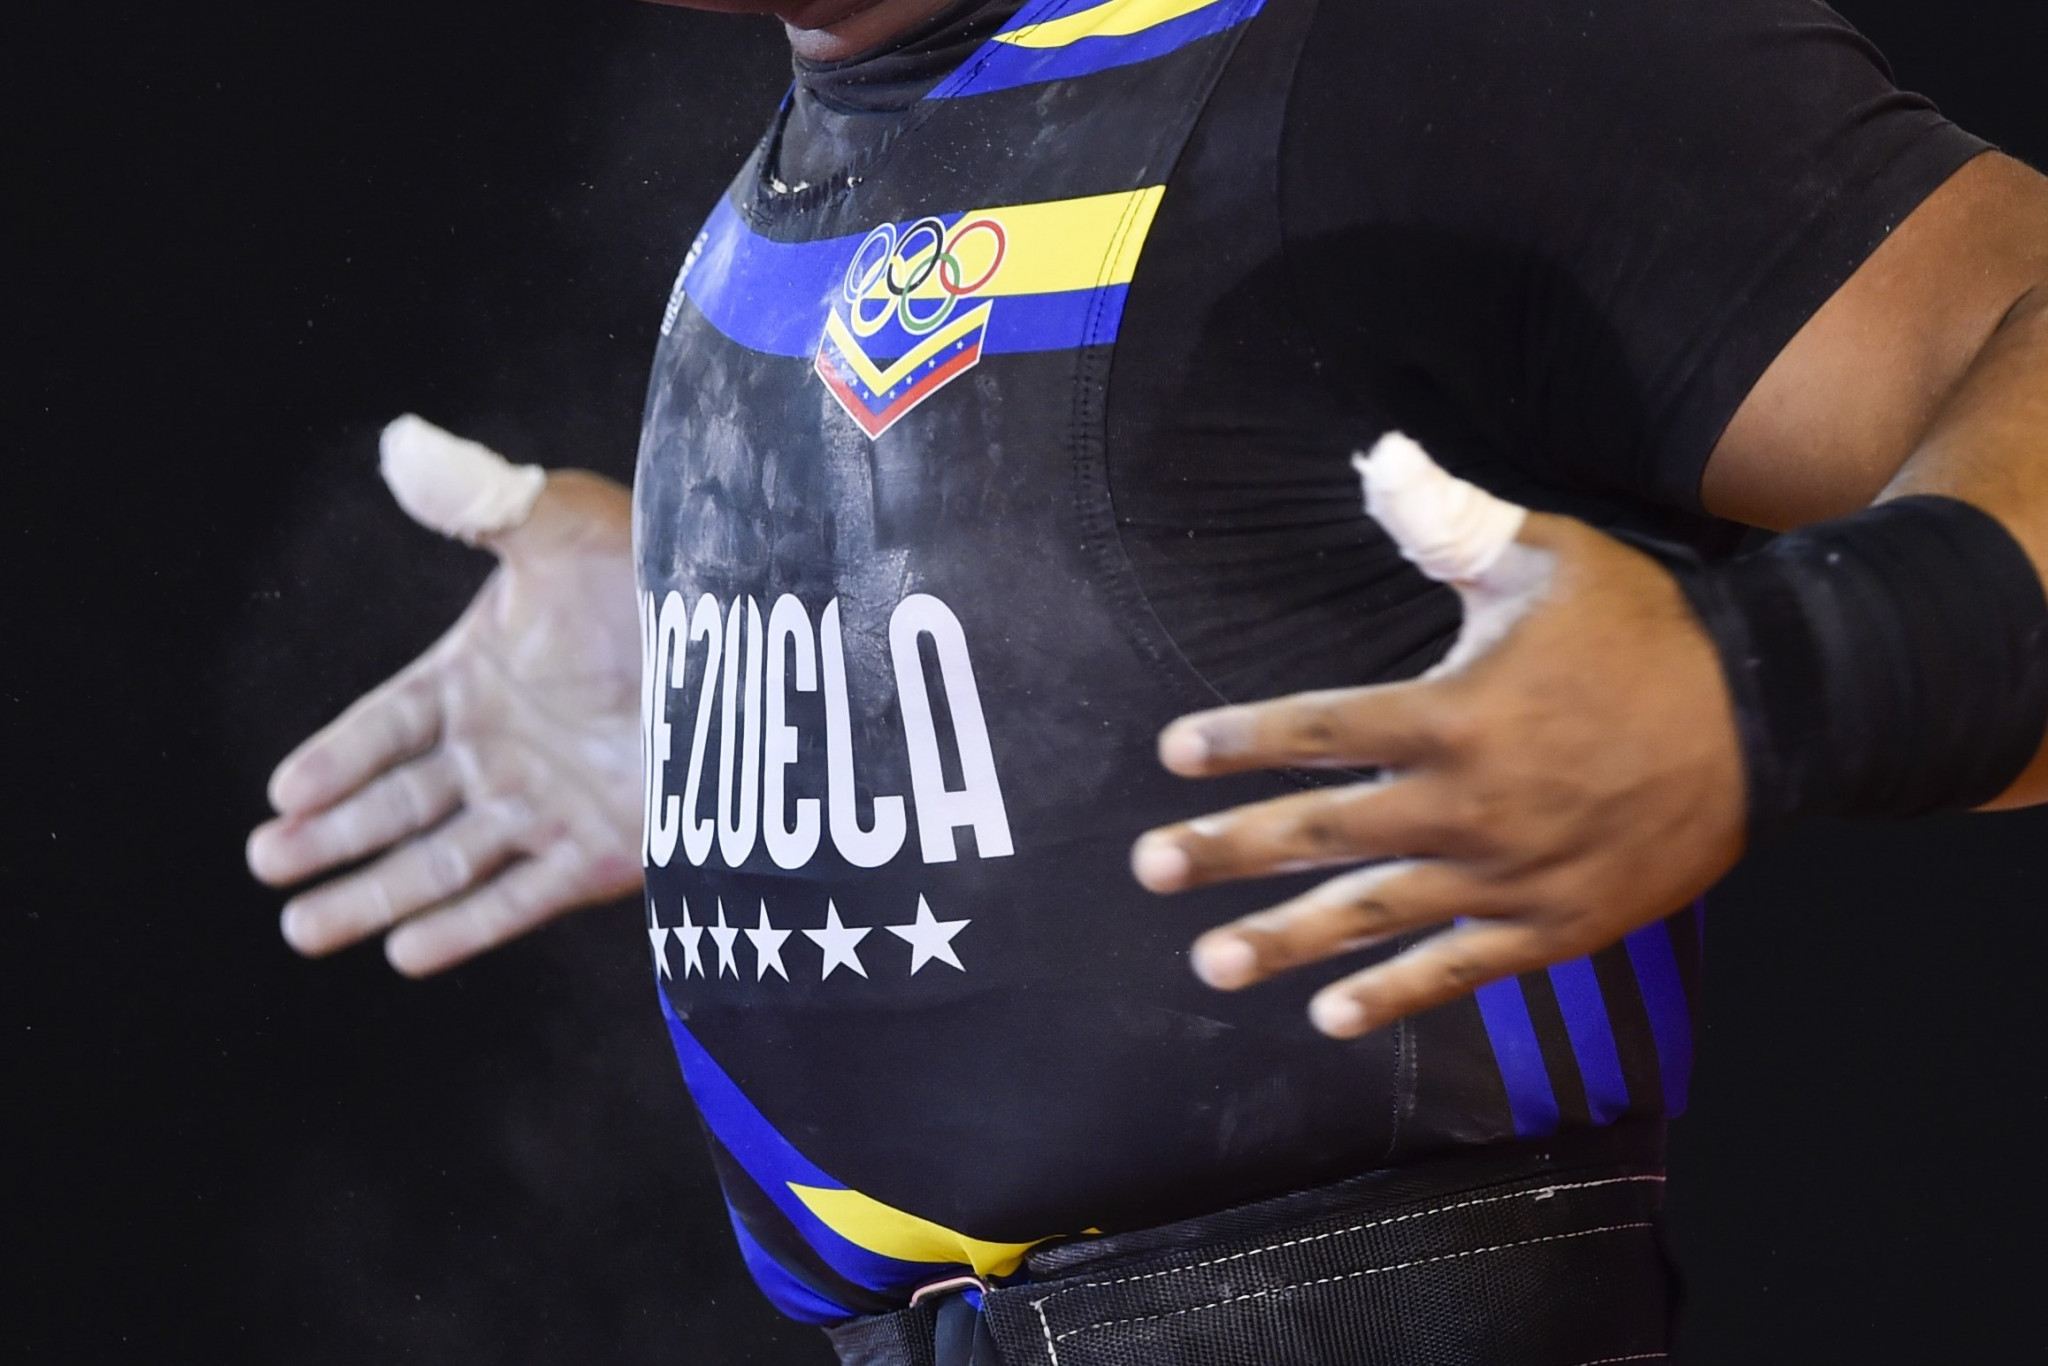 Venezuela latest in line to lose Olympic weightlifting places after doping positive